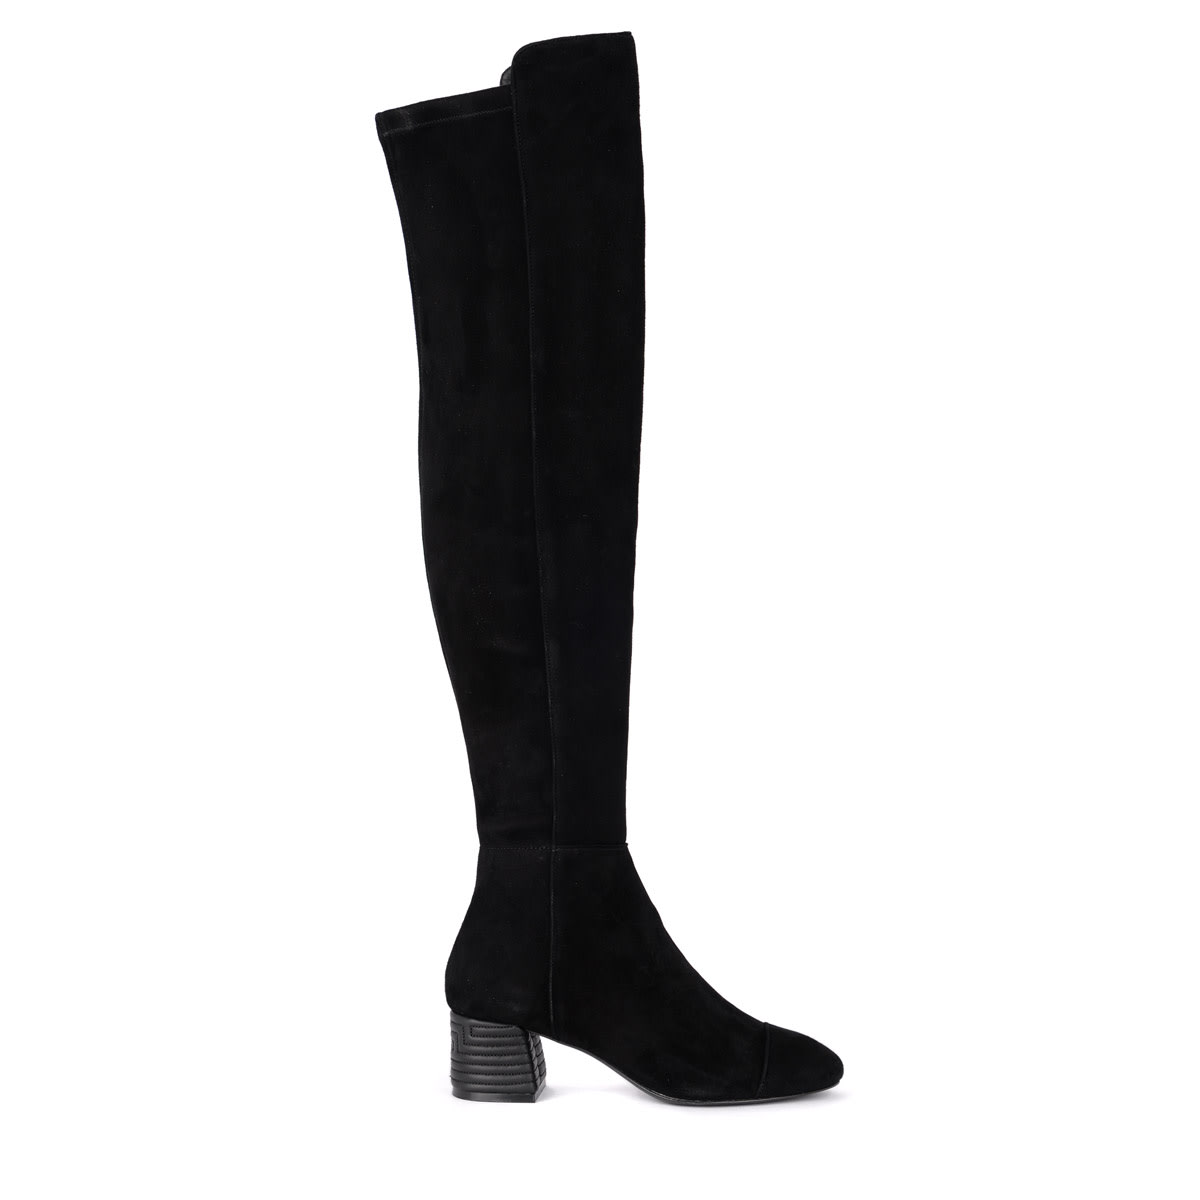 Tory Burch Nina Black Suede Boots